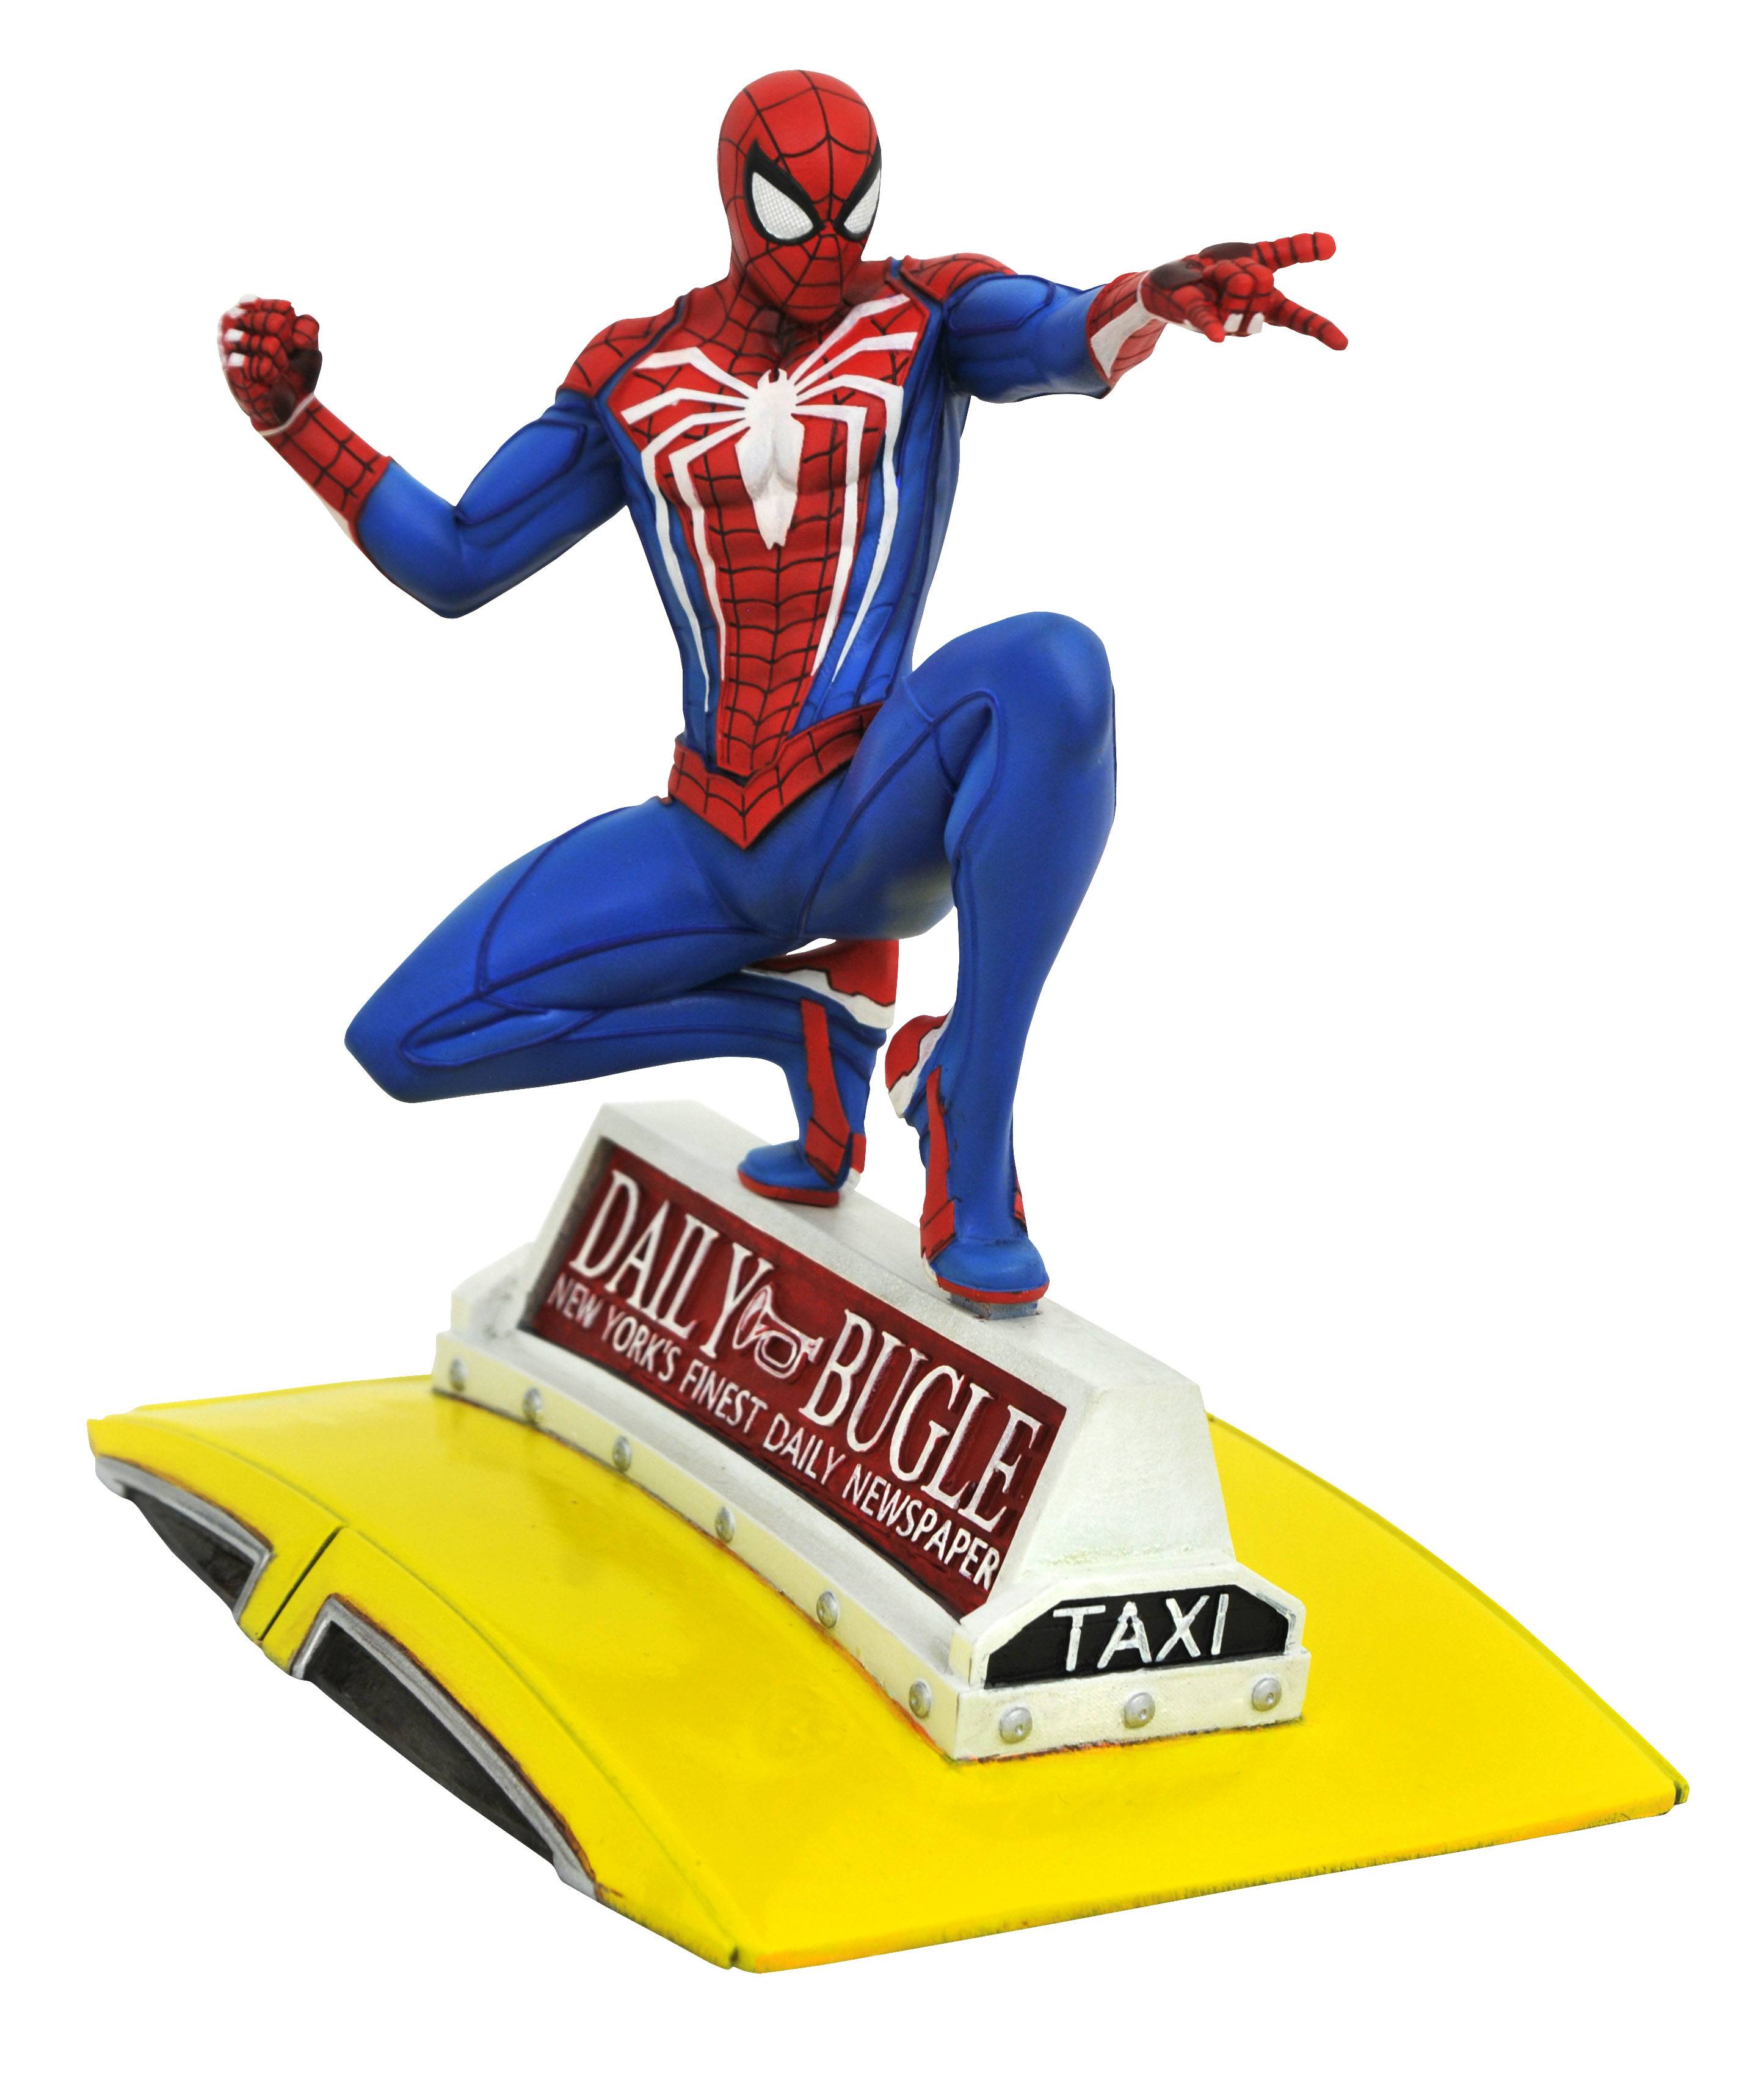 MARVEL GALLERY PS4 SPIDER-MAN ON TAXI STATUE